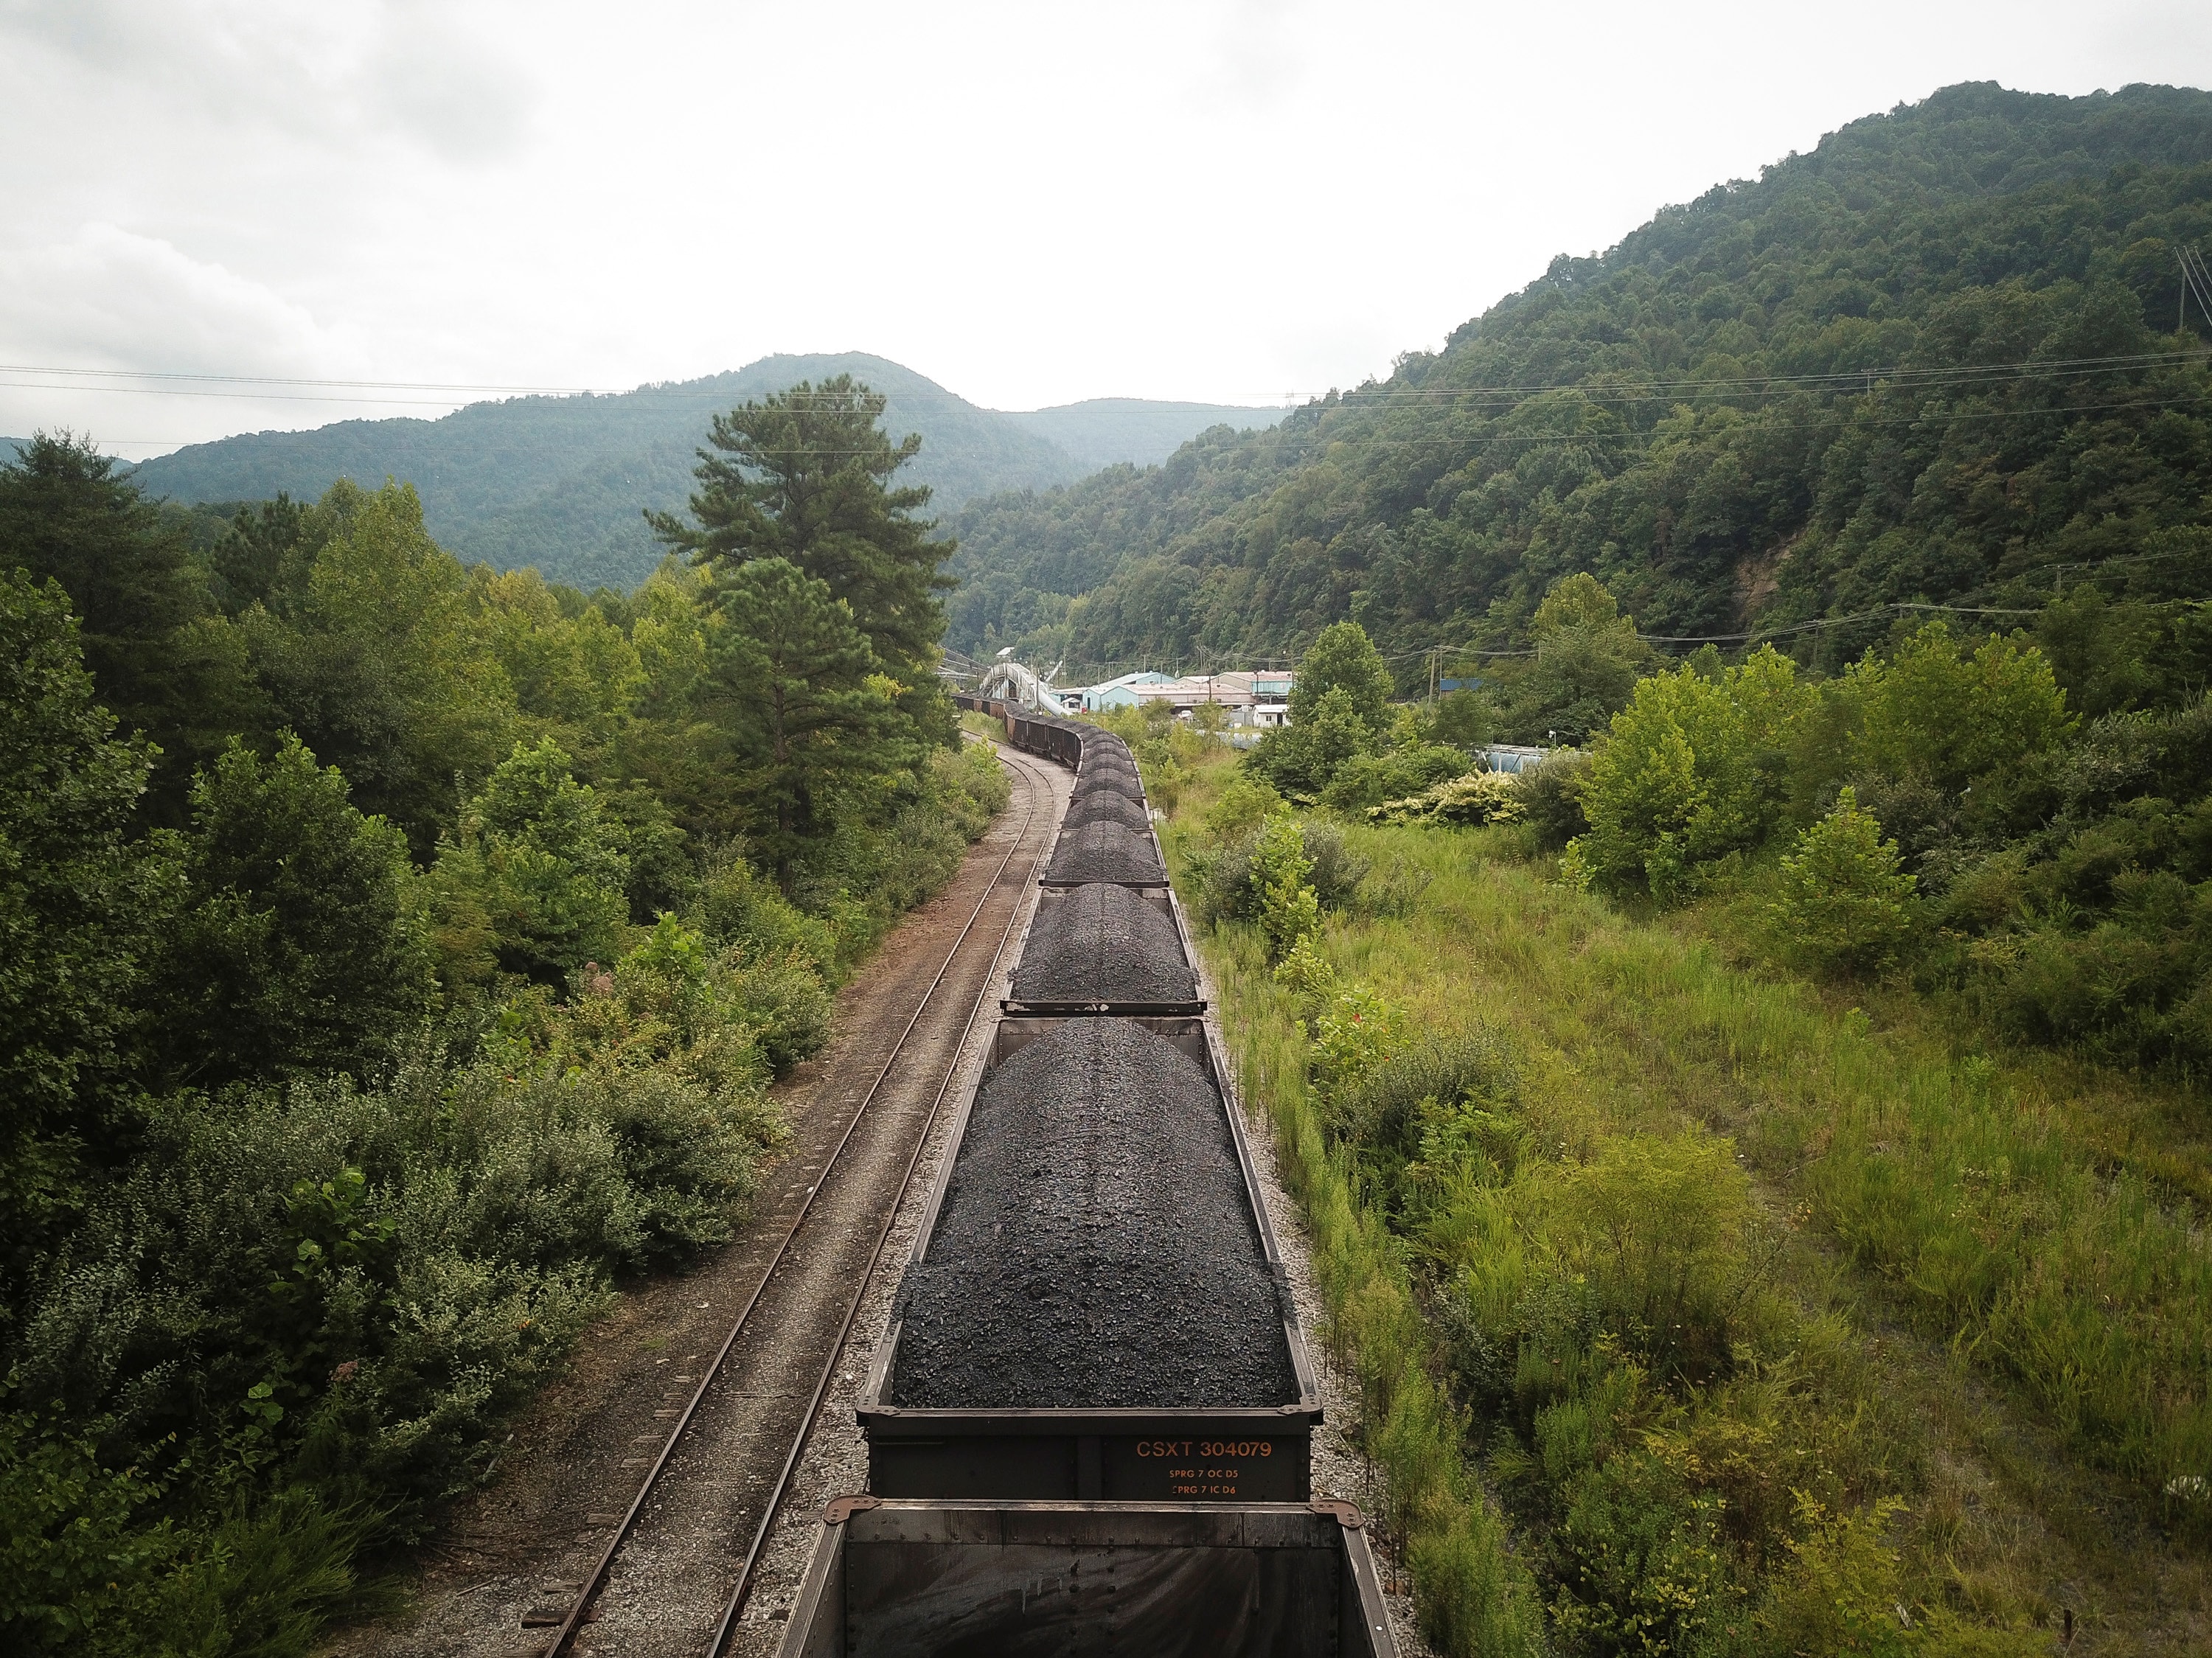 A train loaded with coal sits on the tracks inside the now-bankrupt mining company Blackjewel's former Black Mountain mining complex. United Methodist churches have stepped up to offer food, school supplies and help with utility bills to out-of-work miners. Photo by Charles Mostoller/Reuters photo